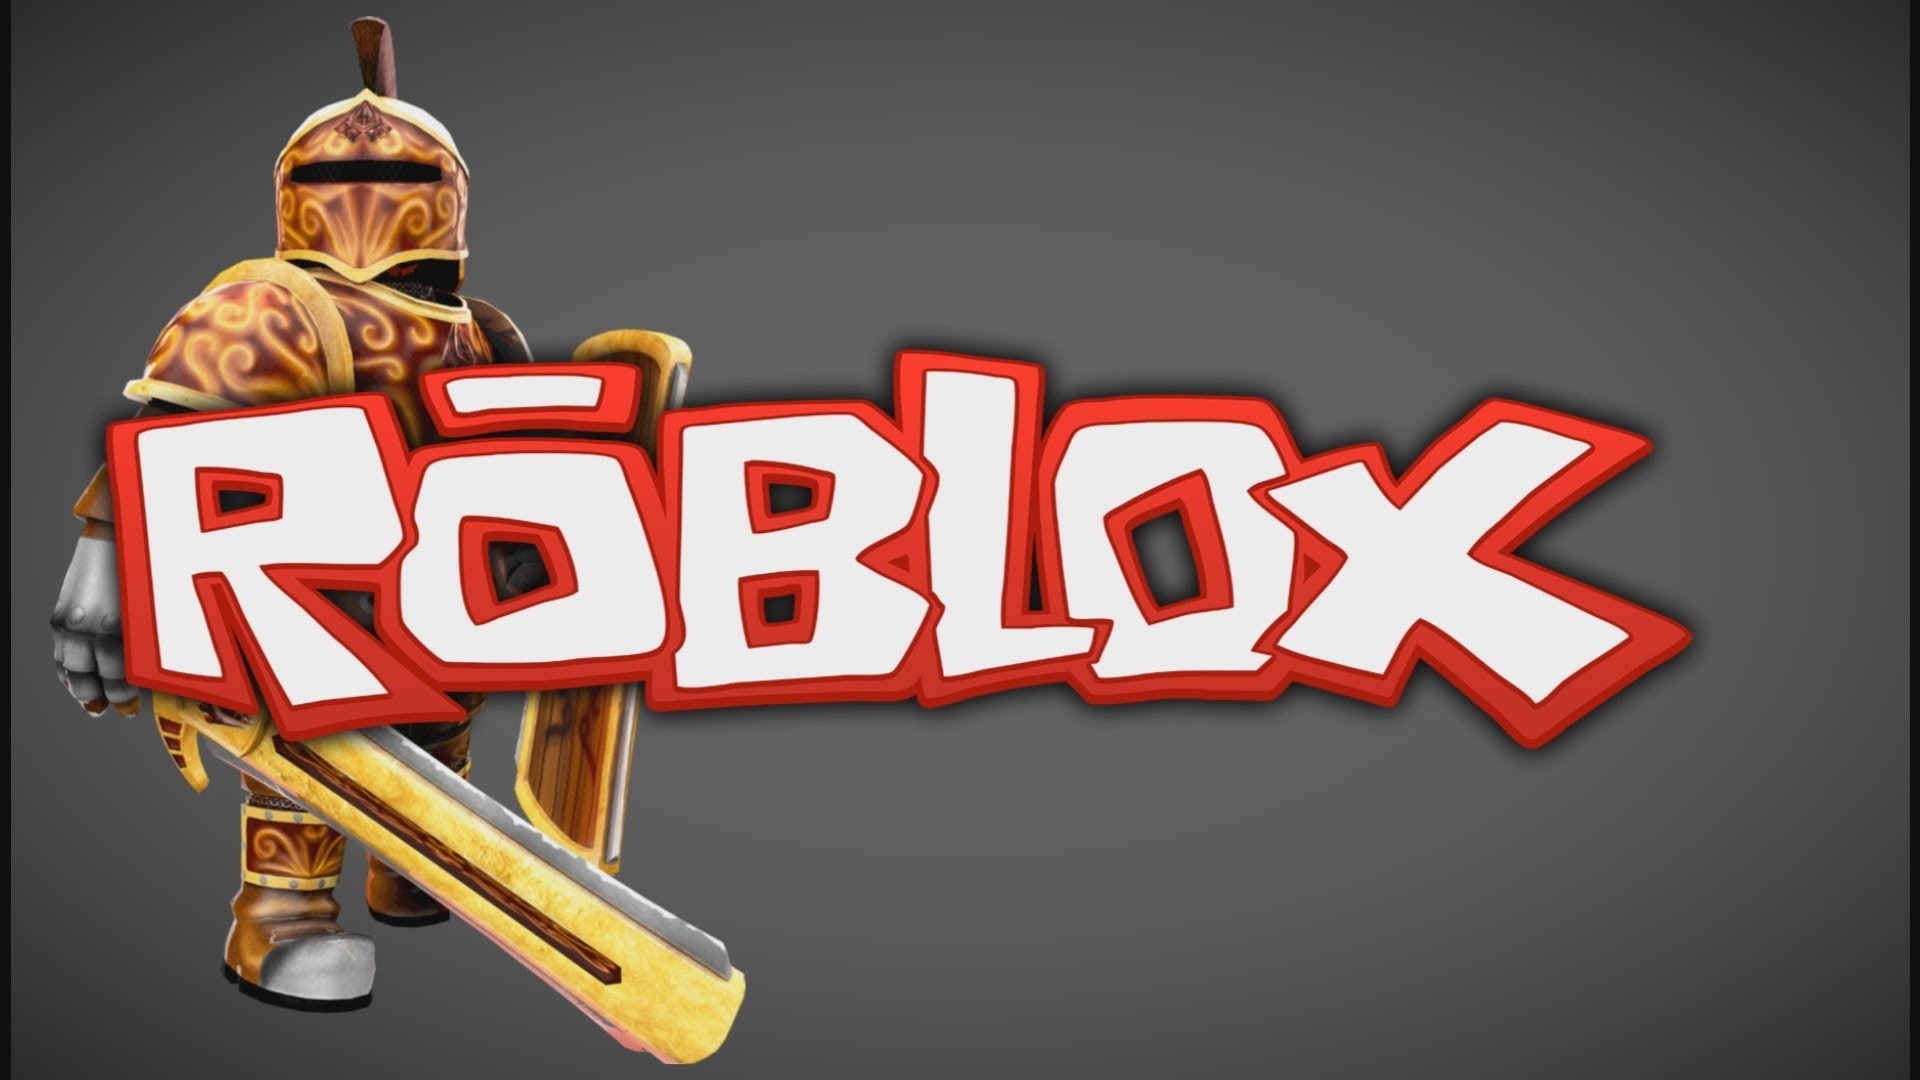 Cool Wallpapers Roblox Roblox Wallpapers Wallpaper Cave Download For Free On All Your Devices Computer Smartphone Or Tablet Kumpulan Alamat Grapari Telkomsel Dan Alamat Bank - cool roblox background for boys